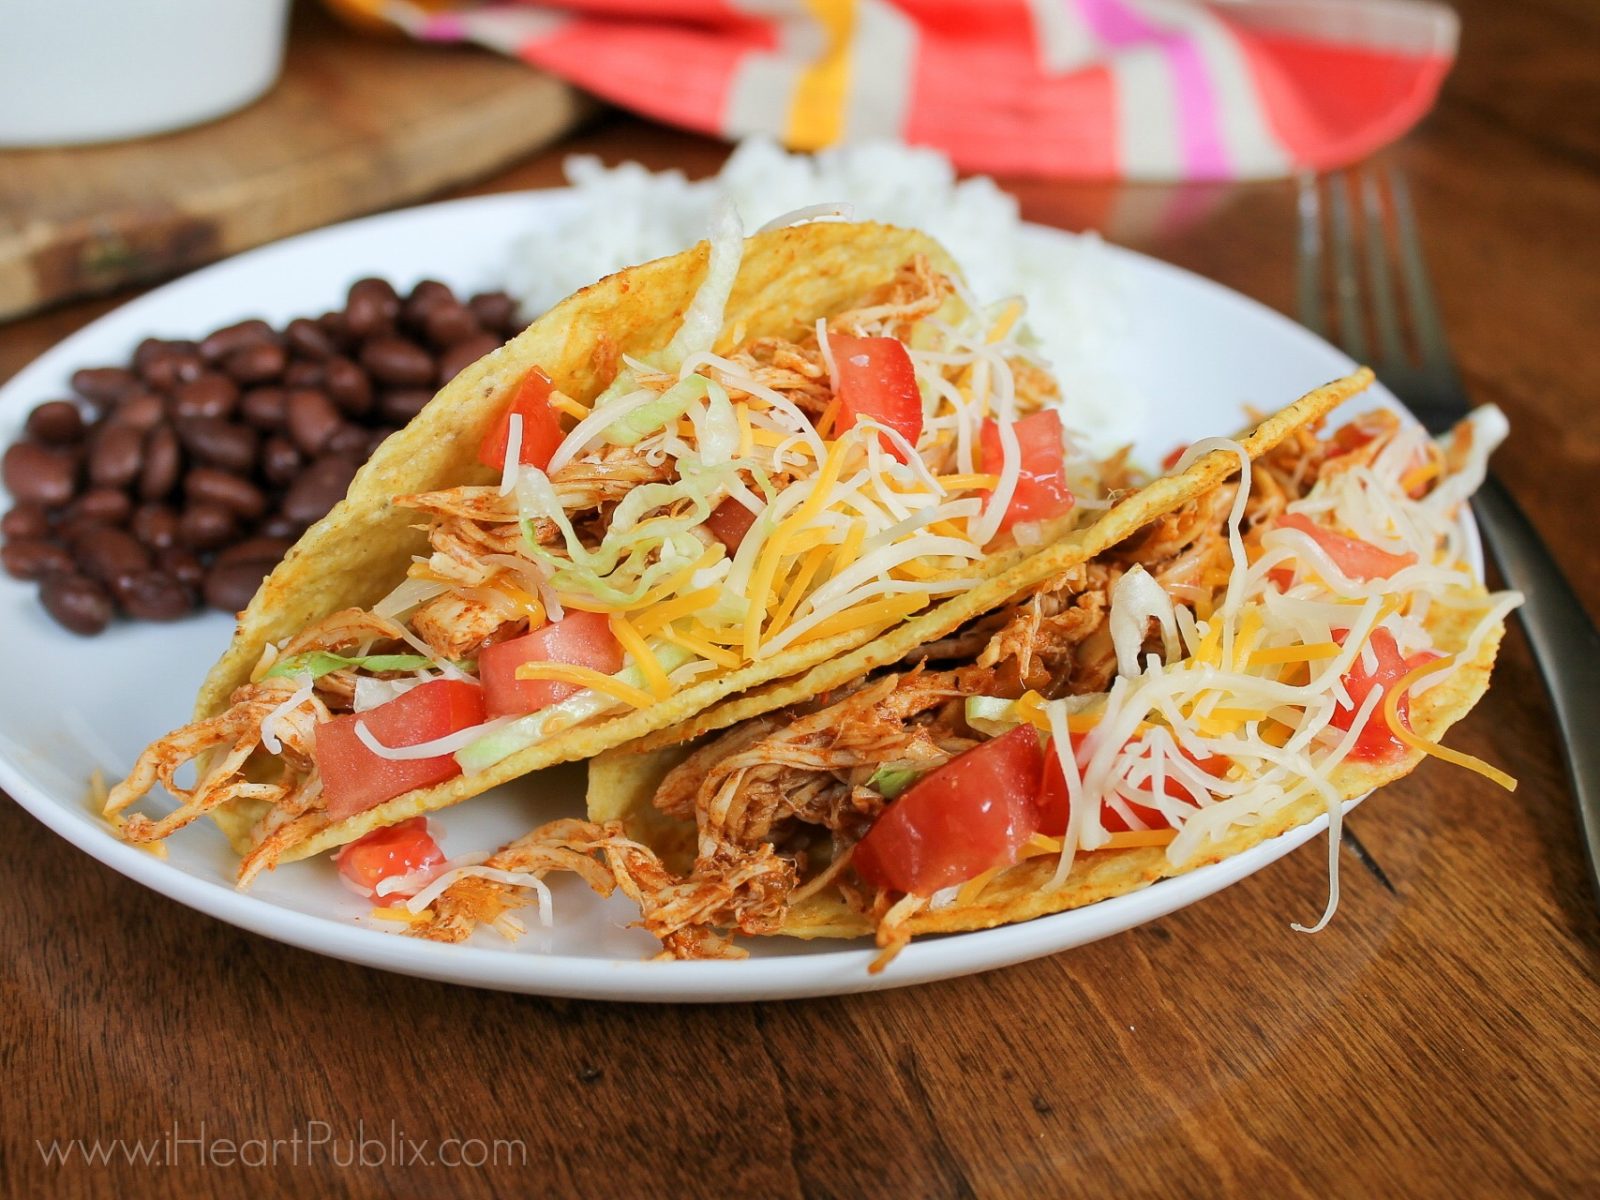 Slow Cooker Chicken Tacos – Super Meal To Go With The Publix Sales